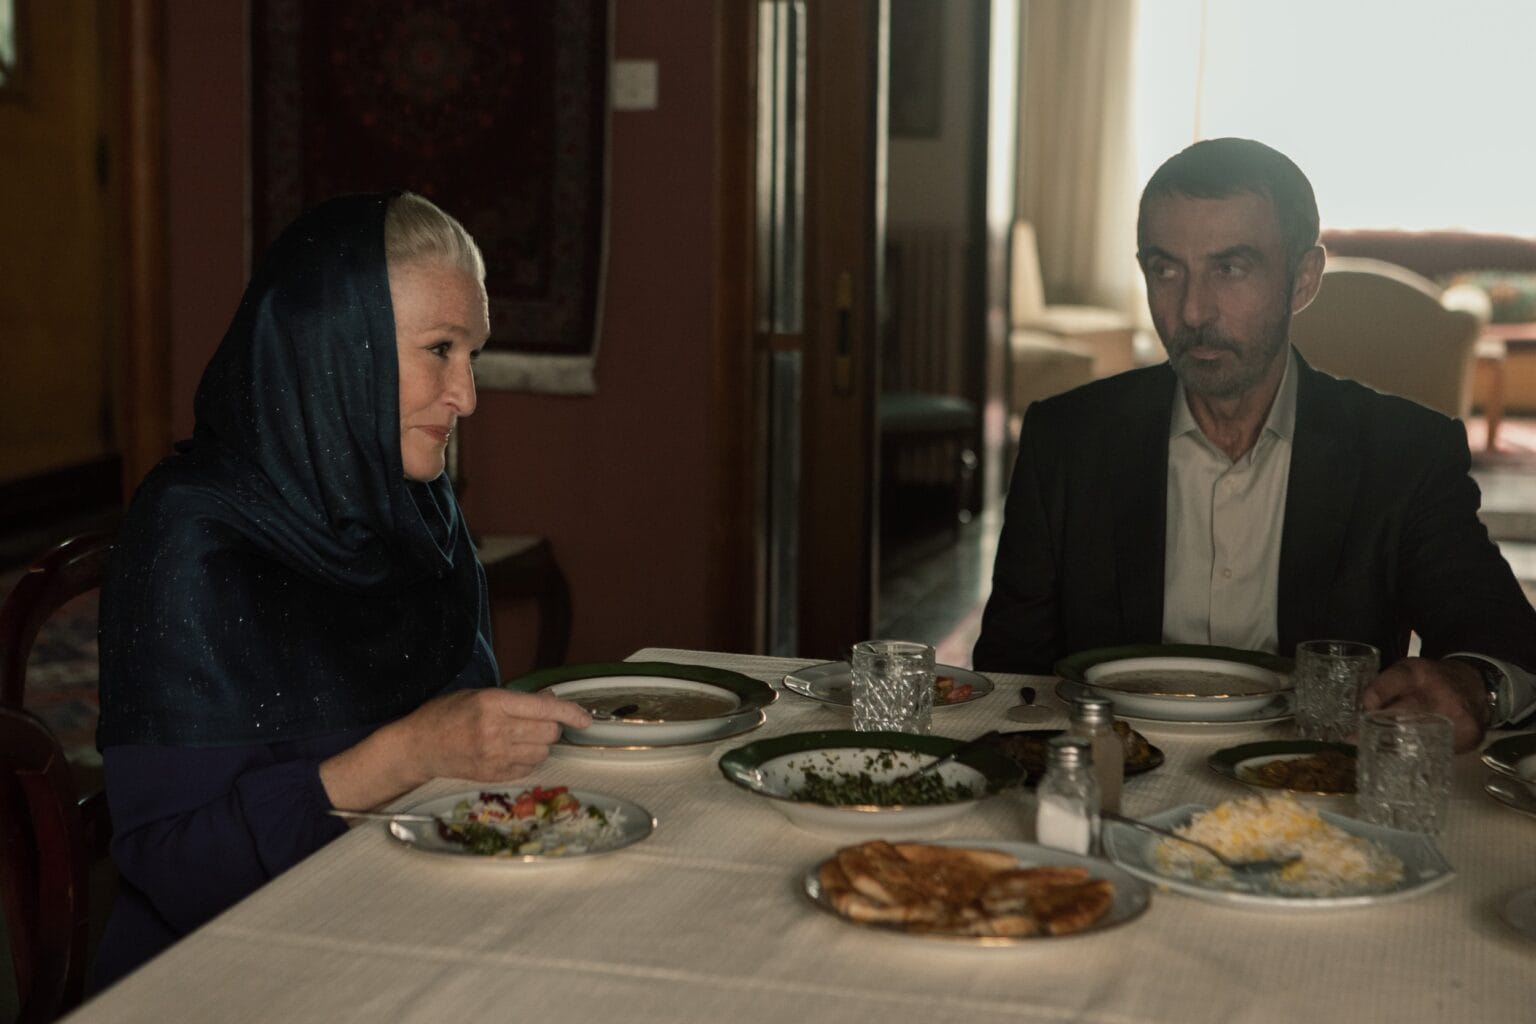 Tehran recap: This is far from an ordinary, friendly meal.